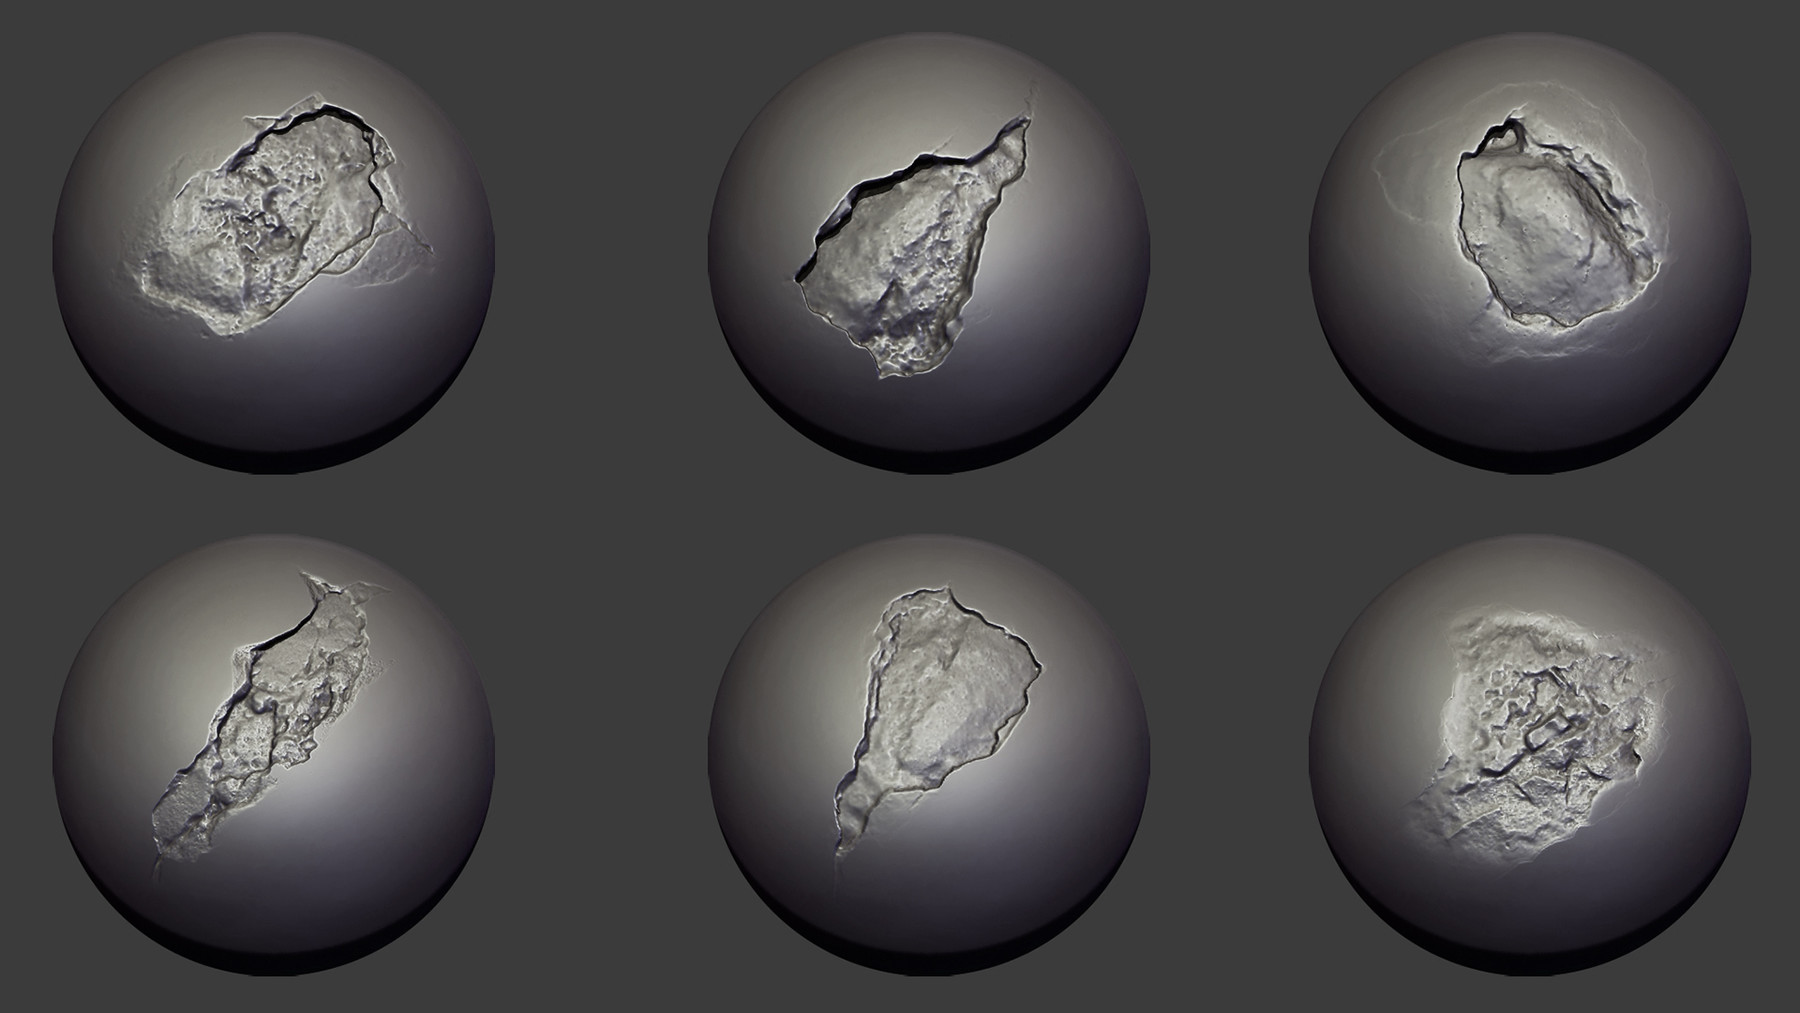 zbrush and crack